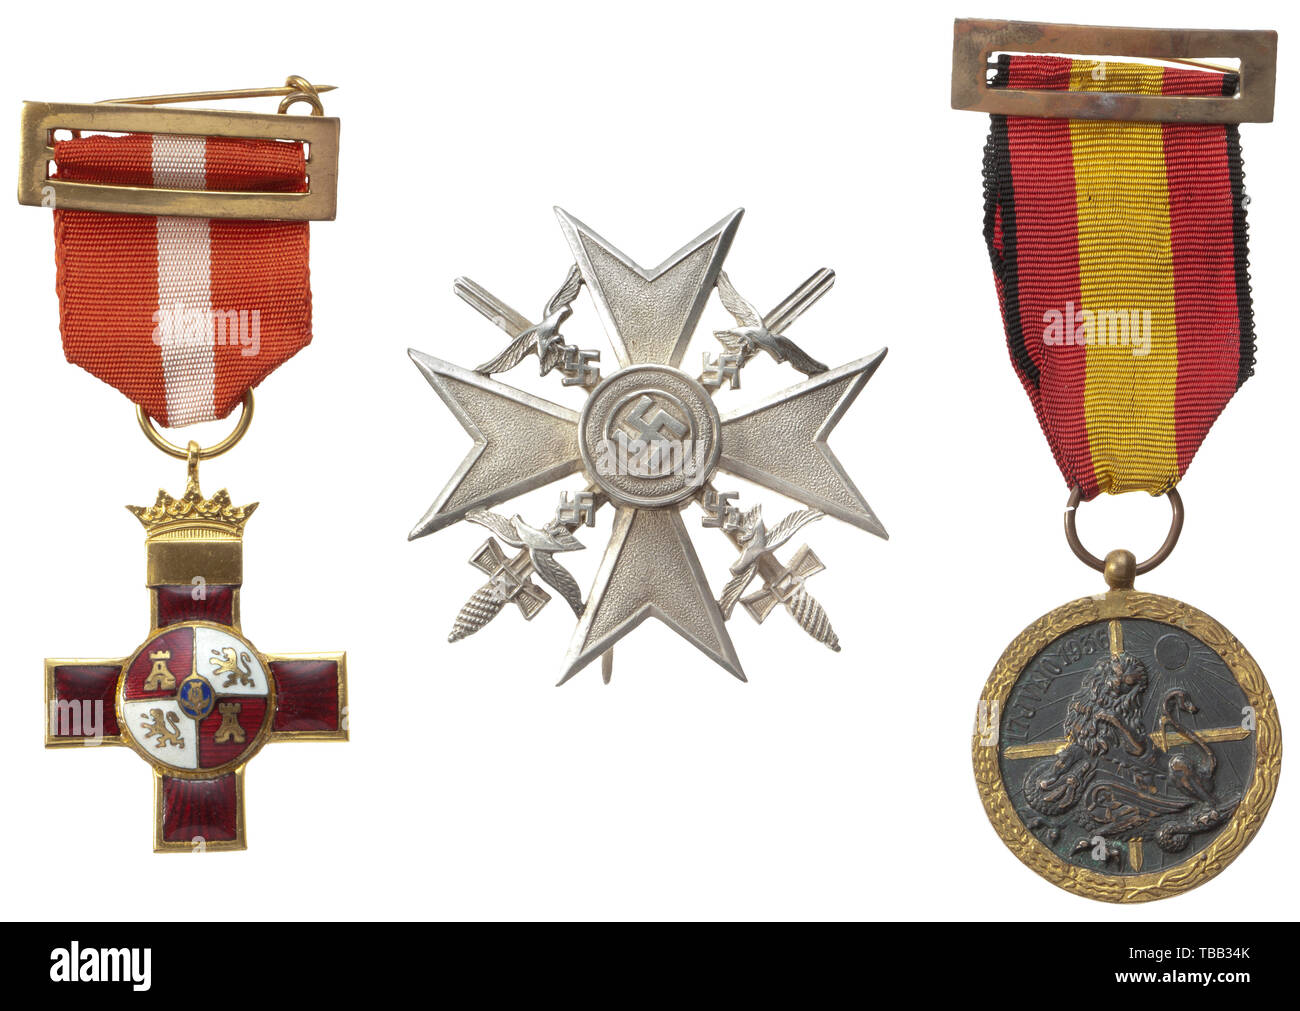 Orders and award documents of Gefreiter Werner Lomberg Spanish Cross in silver with Swords, '900' hallmarked, unpunched Juncker production. Included is the award document dated 6 June 1939 with blind-stamped seal and facsimile Hitler signature. Also, a Spanish Campaign Medal and a Knight's Cross of the Military Merit Order, red division, and for each the coloured decorative award documents dated 30 September 1938. Together with a participant's document for the Luftwaffe exercises of 3./Flak-Regiment 13 on the island of Rügen 1936/37 with a handwritten list of names. The doc, Editorial-Use-Only Stock Photo